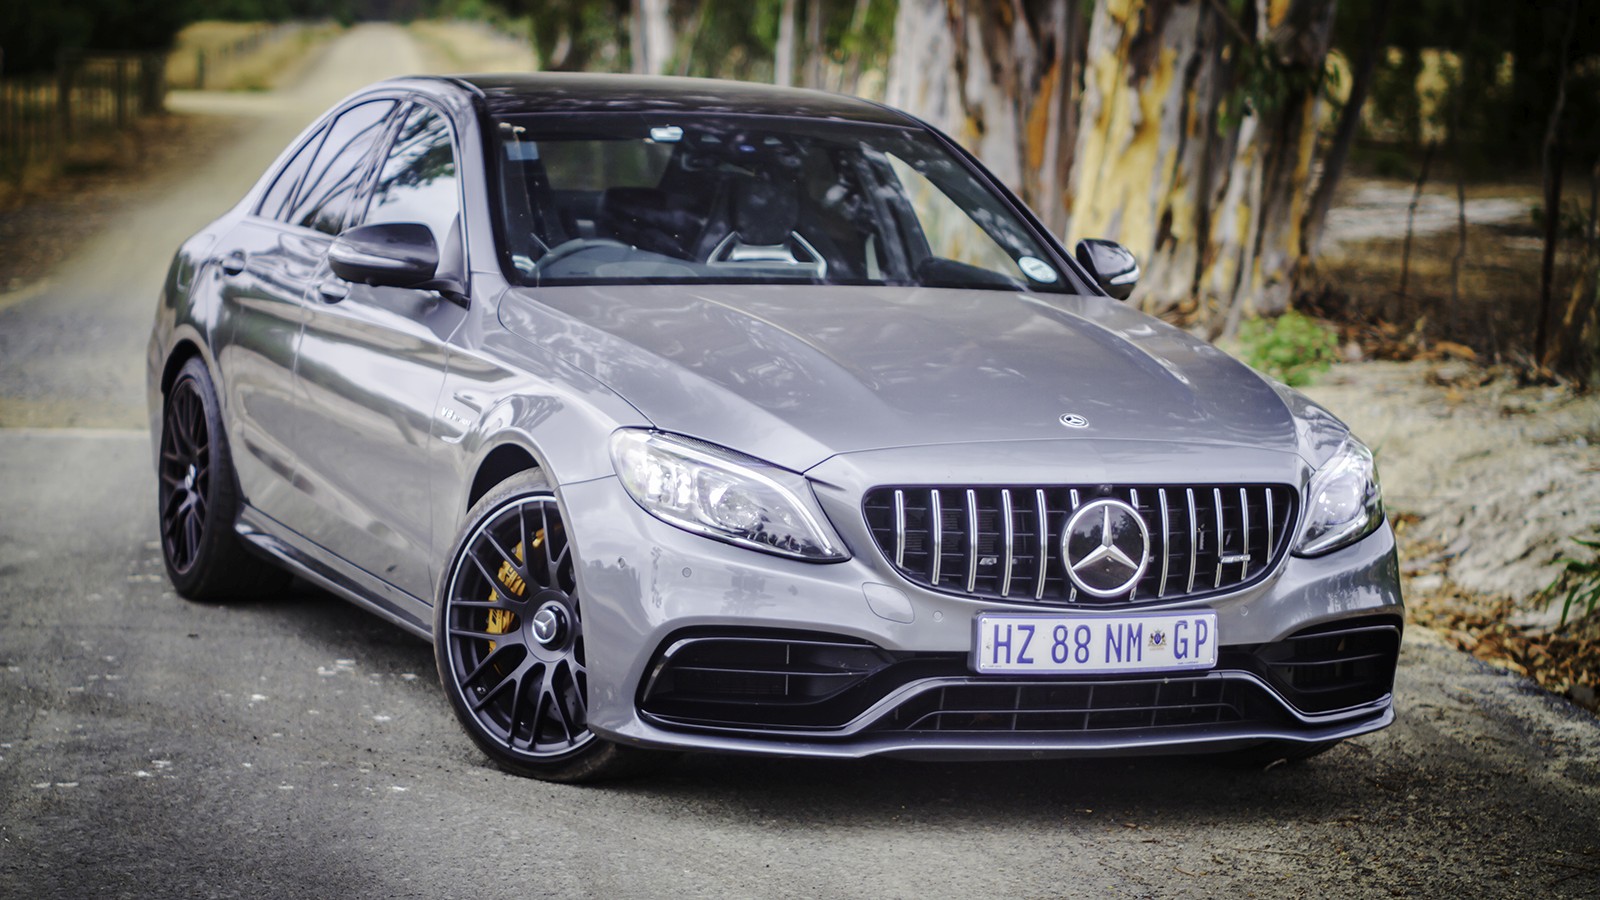 The C63 Amg And The Case For Amg S Final V8 Powered C Class Motorburn